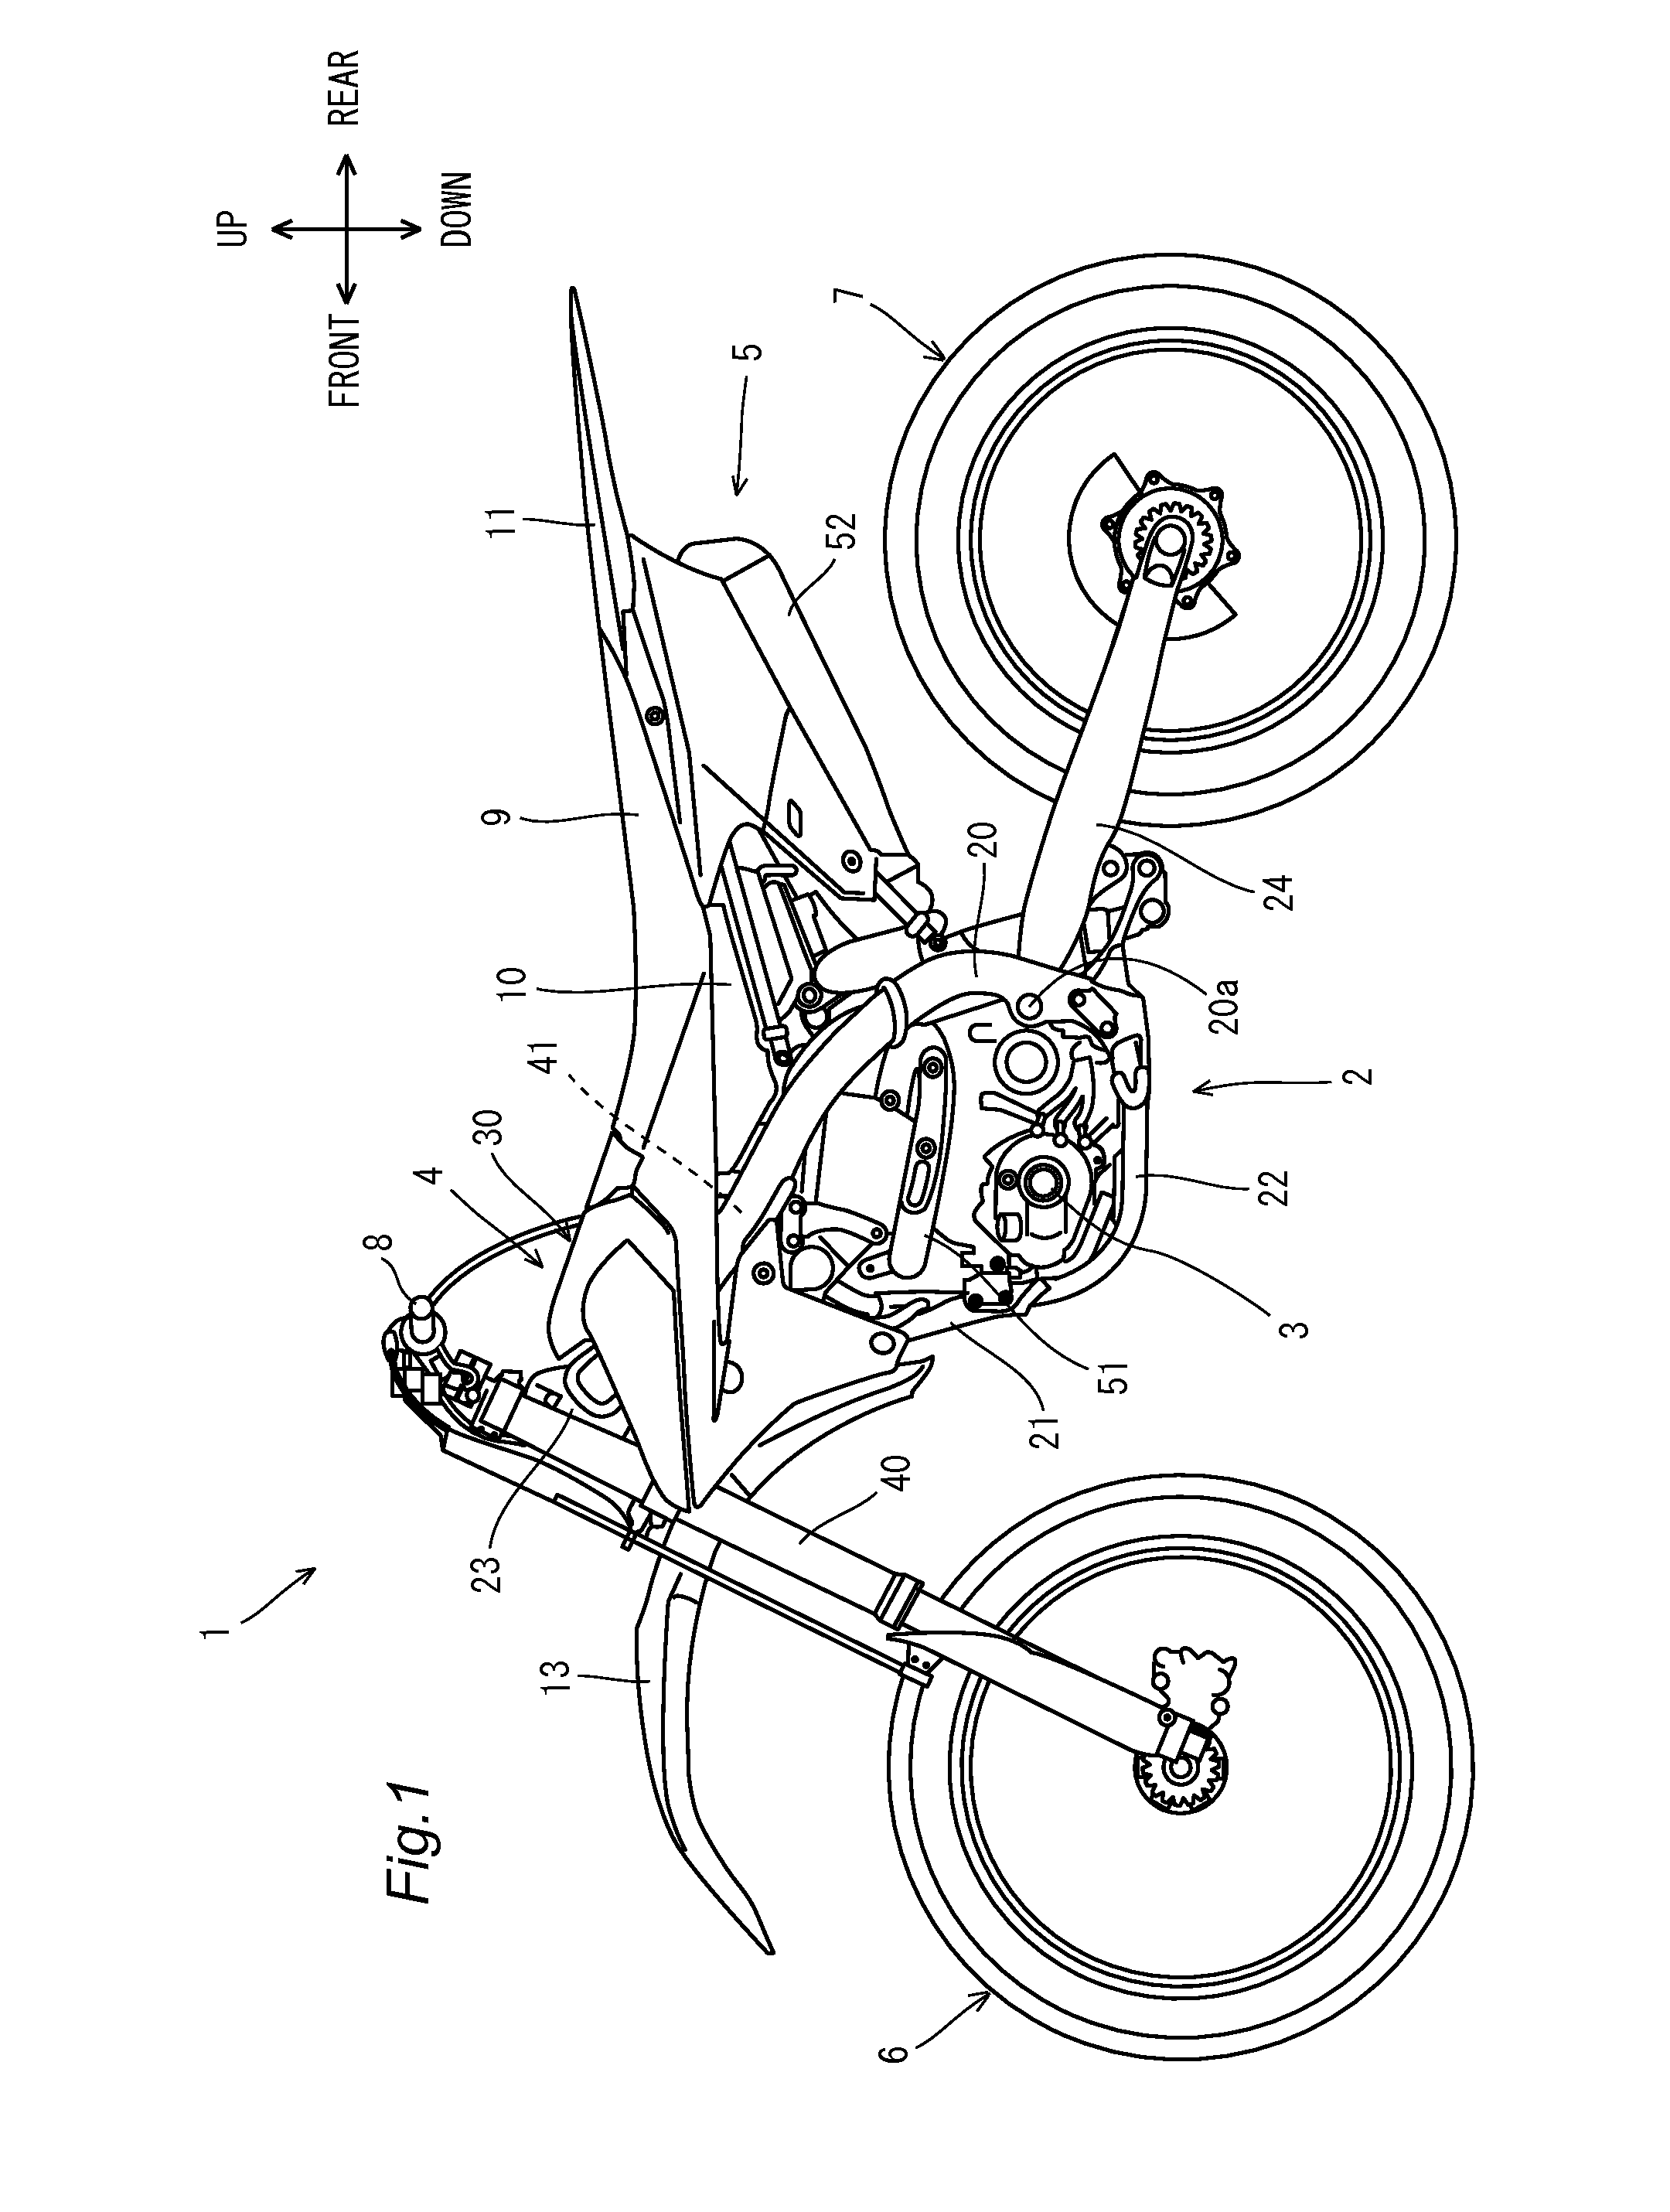 Straddle-type vehicle and method of manufacturing the same